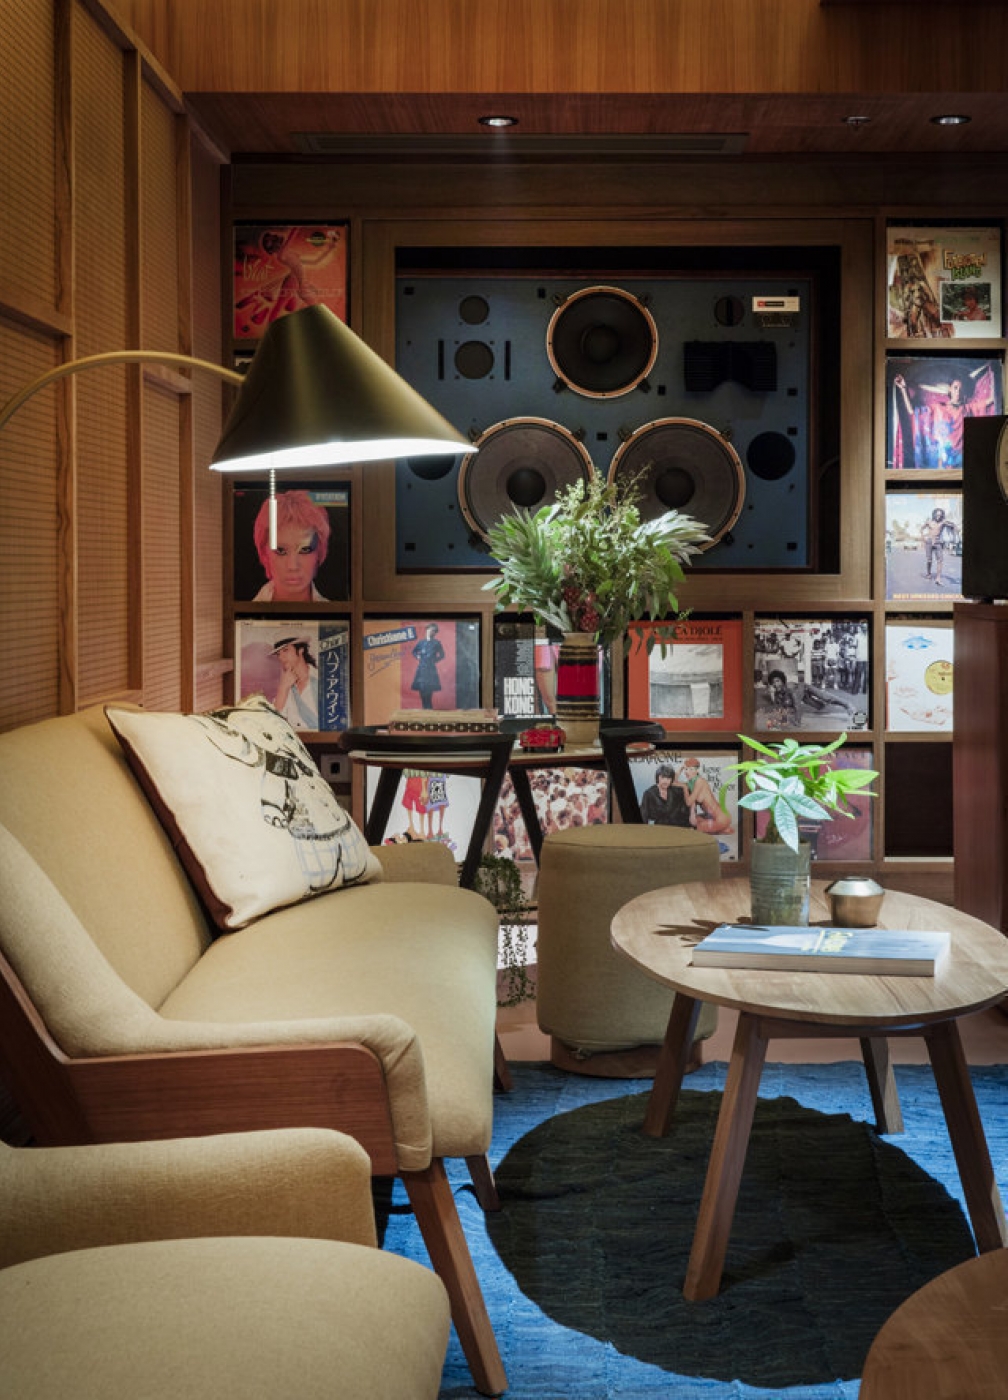 Take a look at Hong Kong’s stunning new vinyl only library and ...